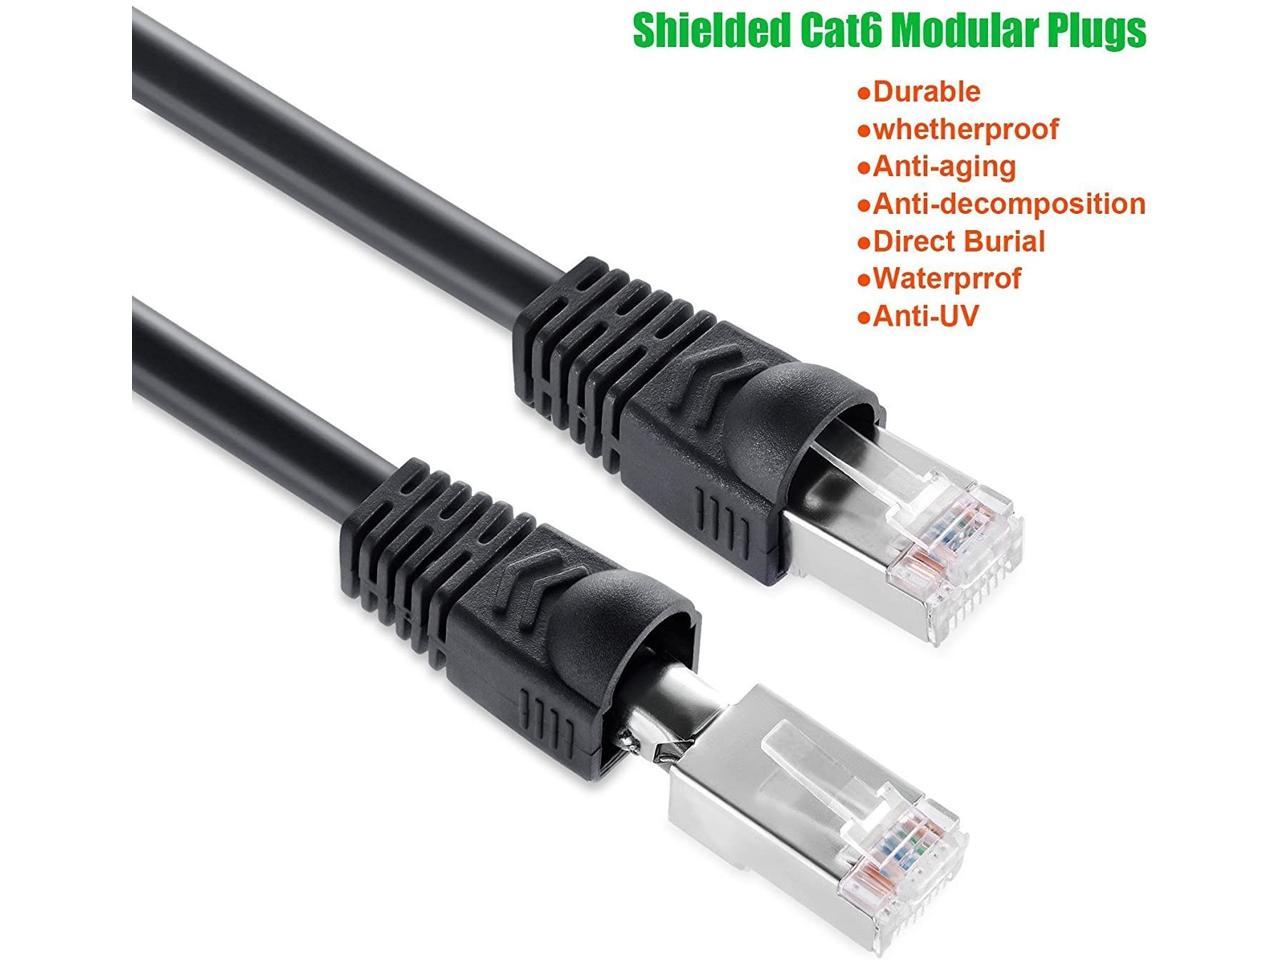 Outdoor Ethernet 25ft Cat6 Cable IMONTA Shielded Grounded UV Resistant Waterproof Buried-able Network Cord